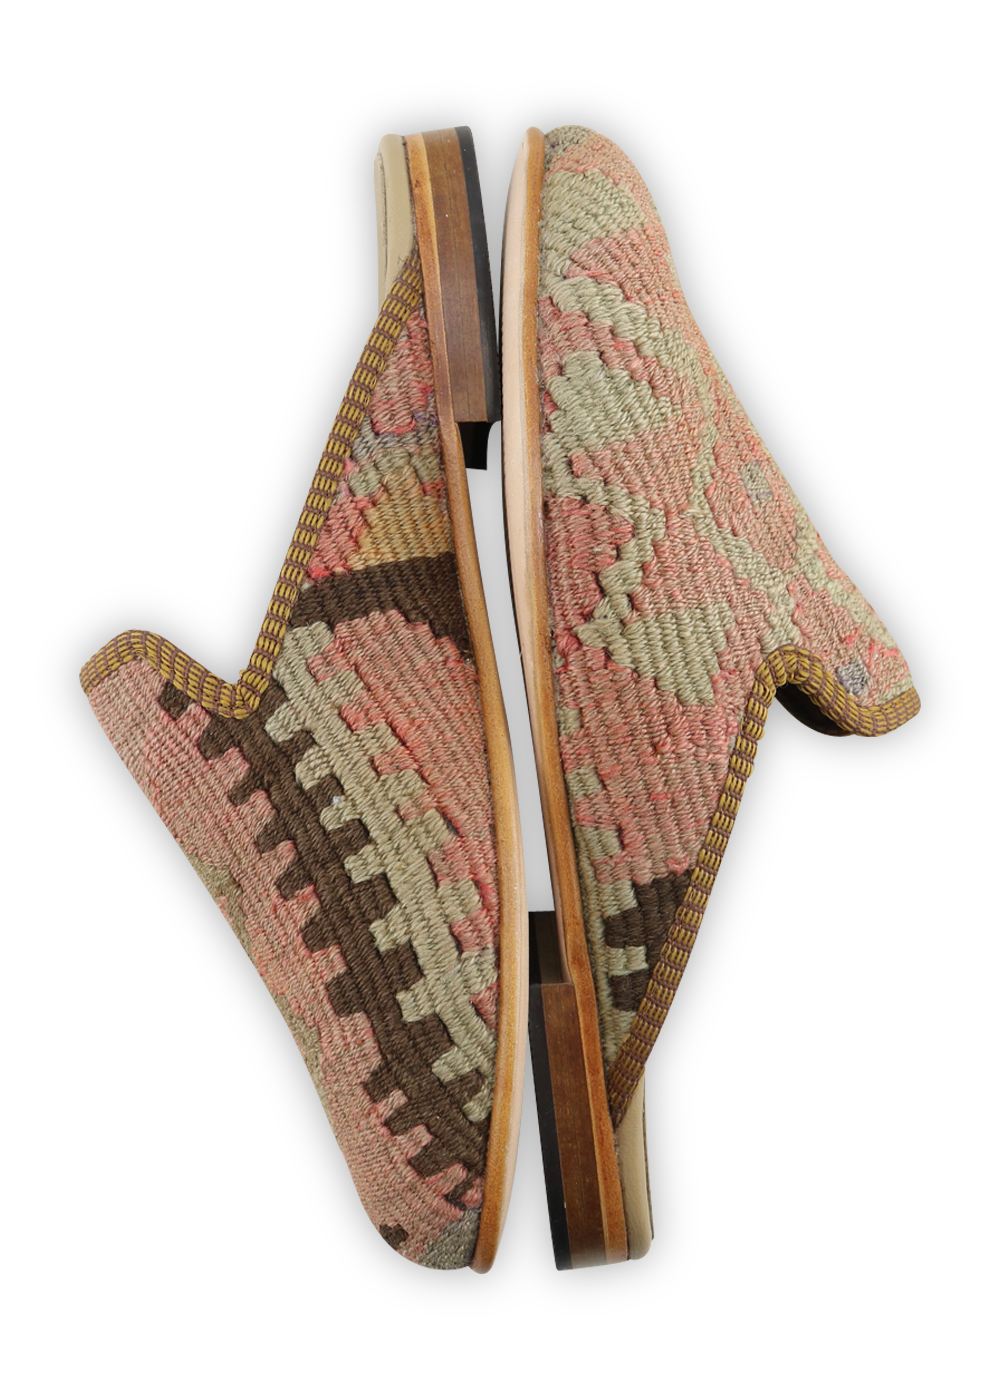 One of a kind slippers handmade from Turkish carpets.